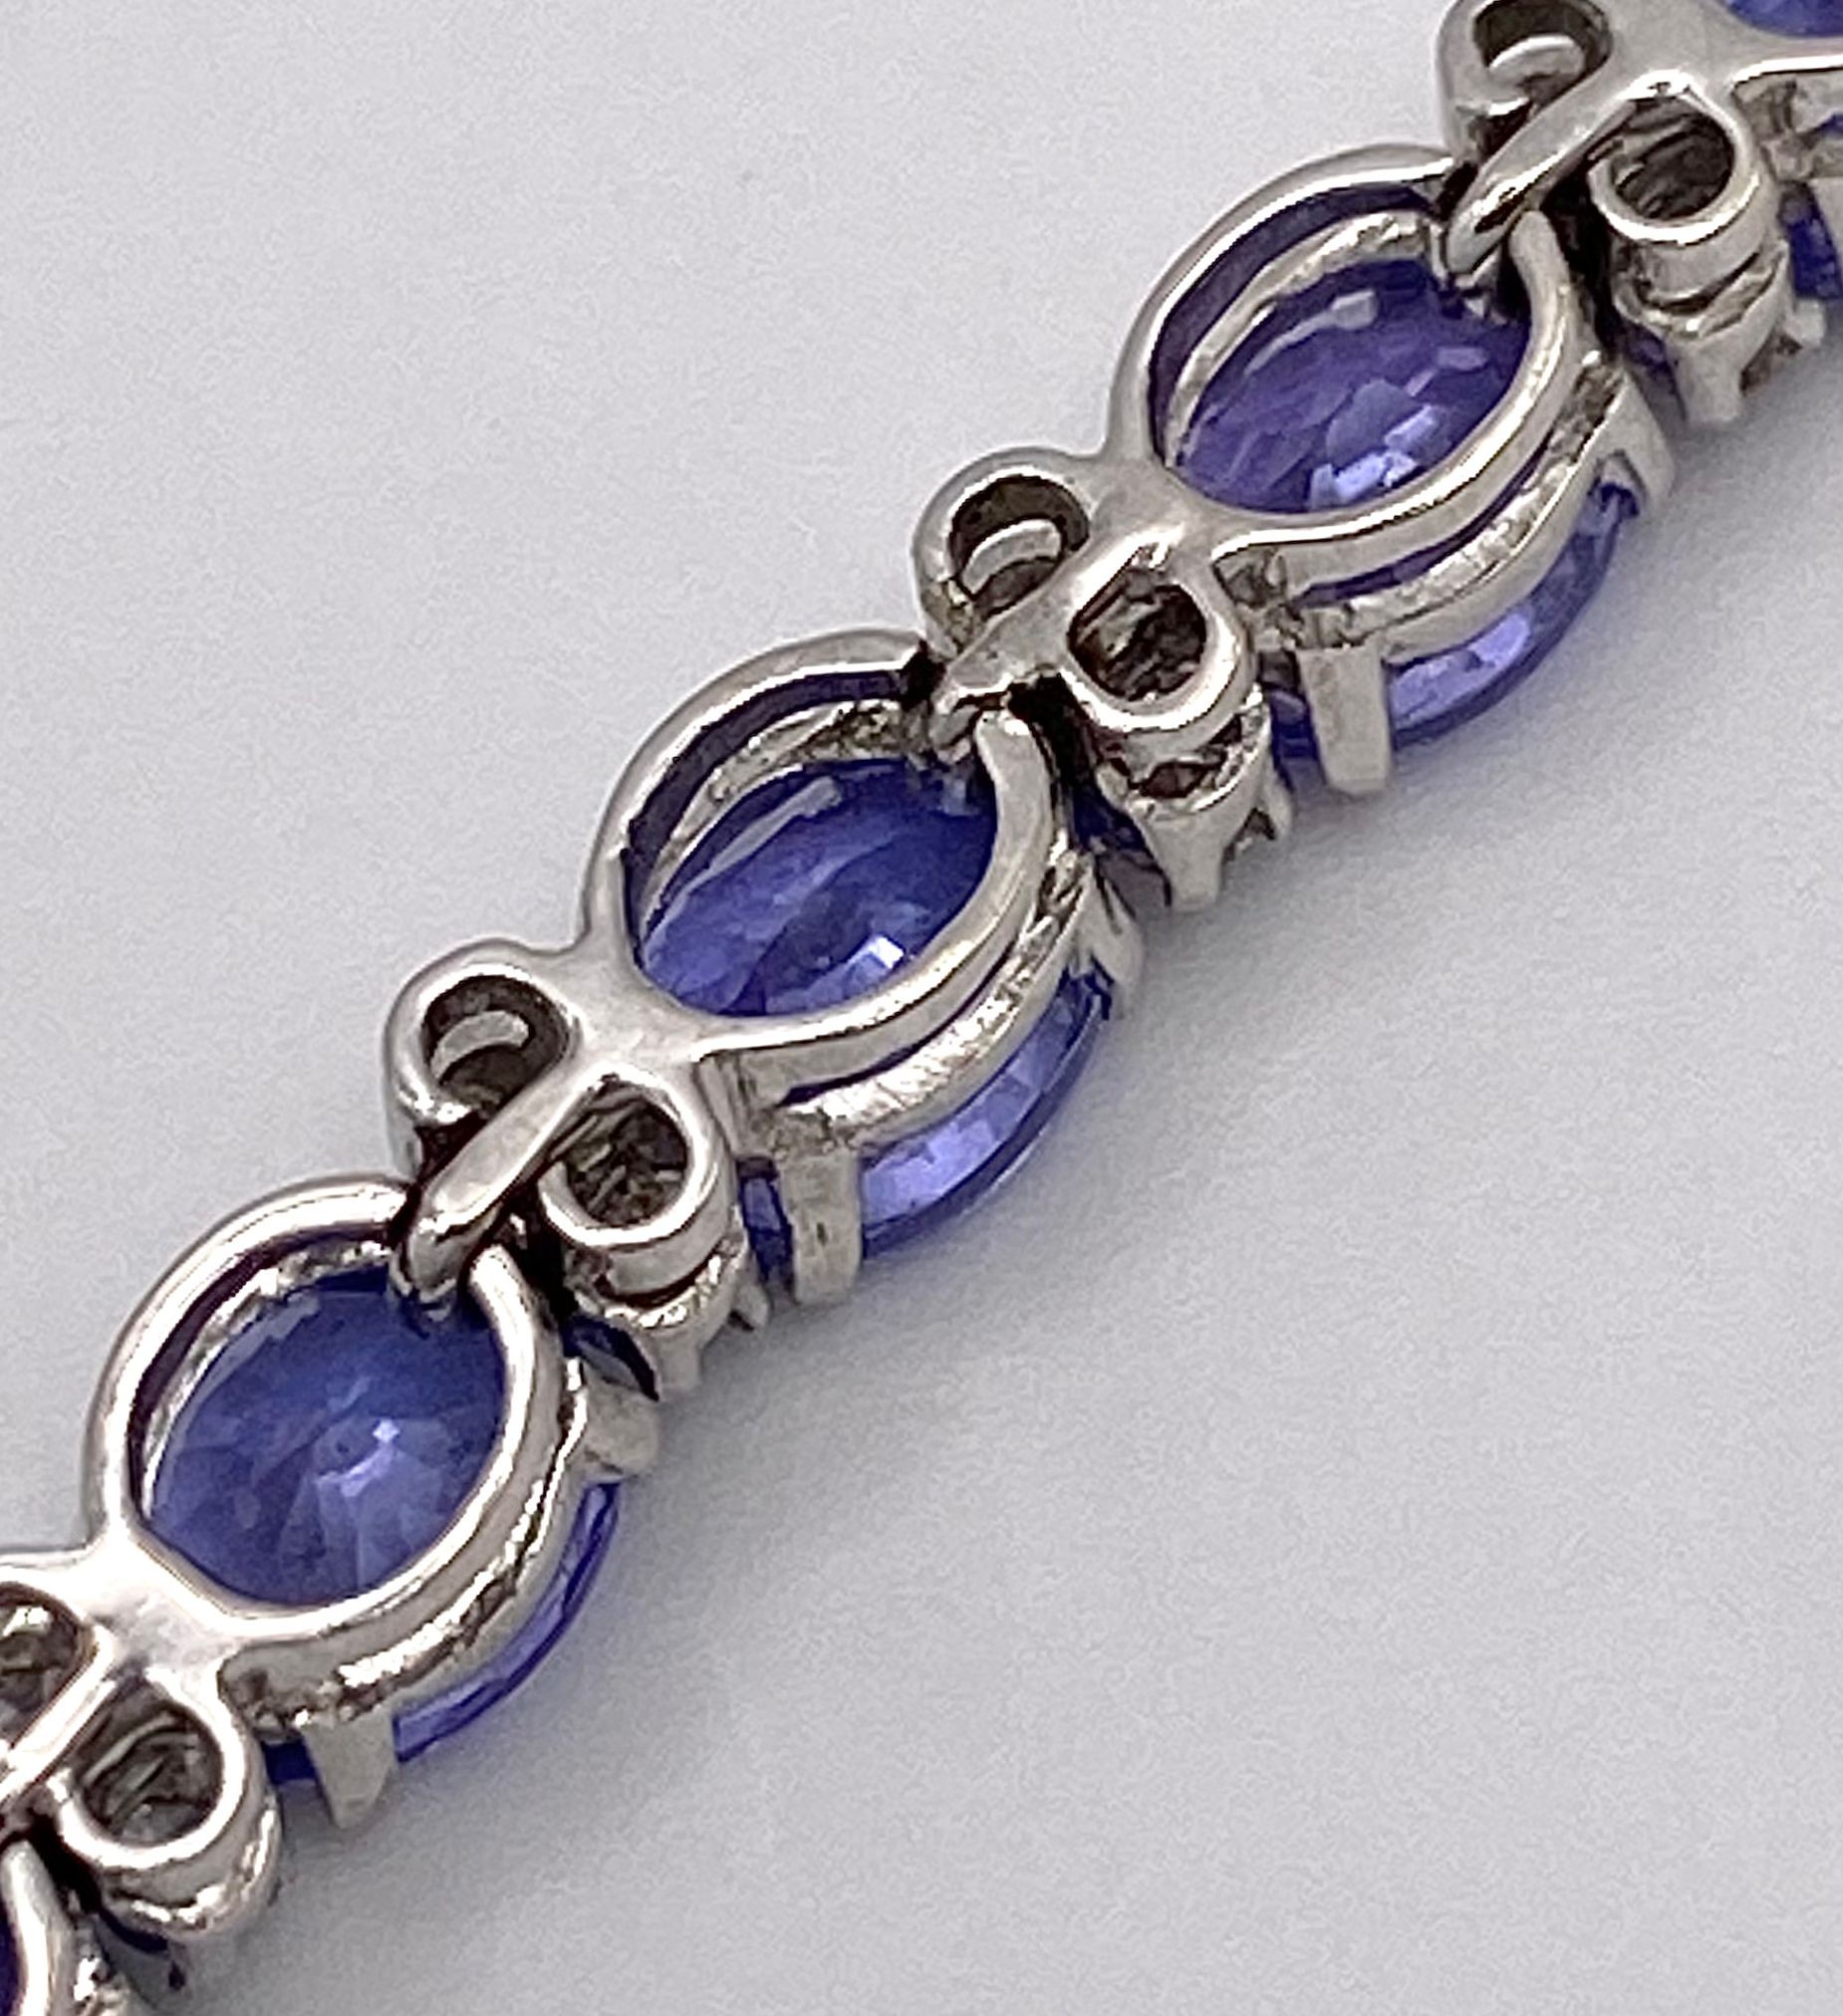 A spectacular 18 K white gold bracelet with oval cut tanzanite gems and round cut diamonds. - Image 14 of 16